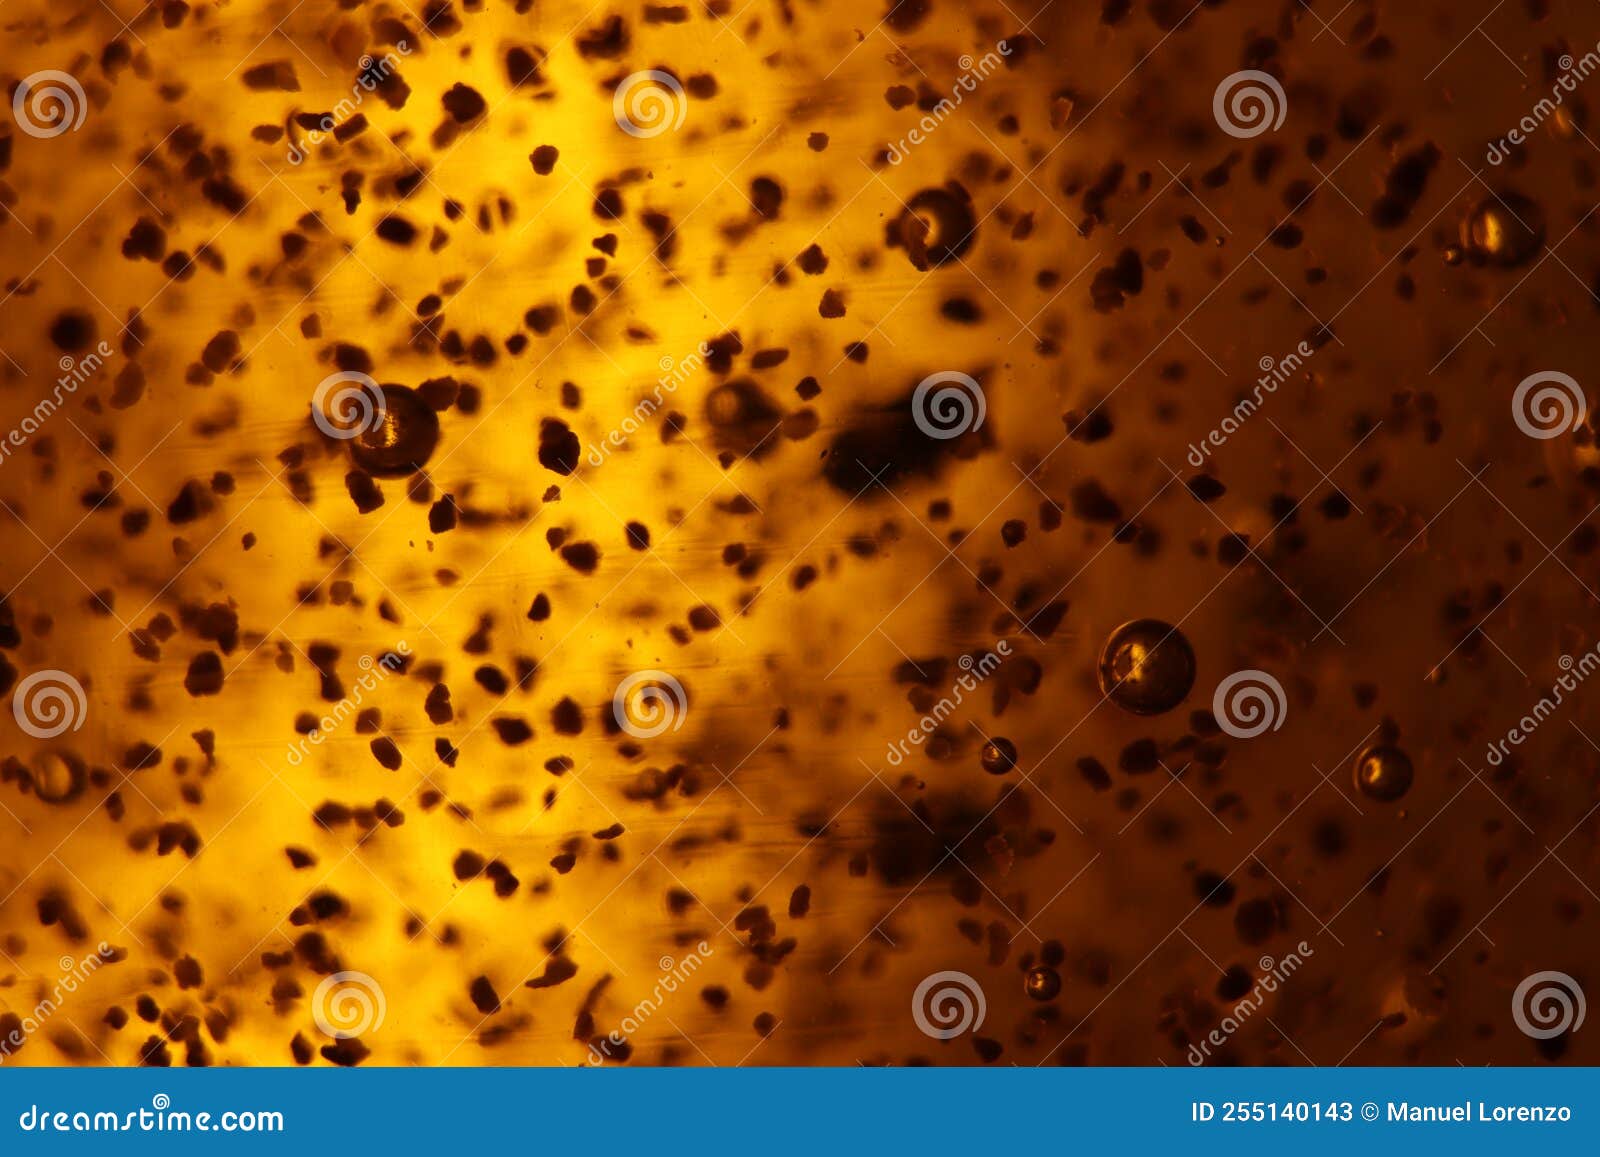 abstract golden background bubbles rare s different